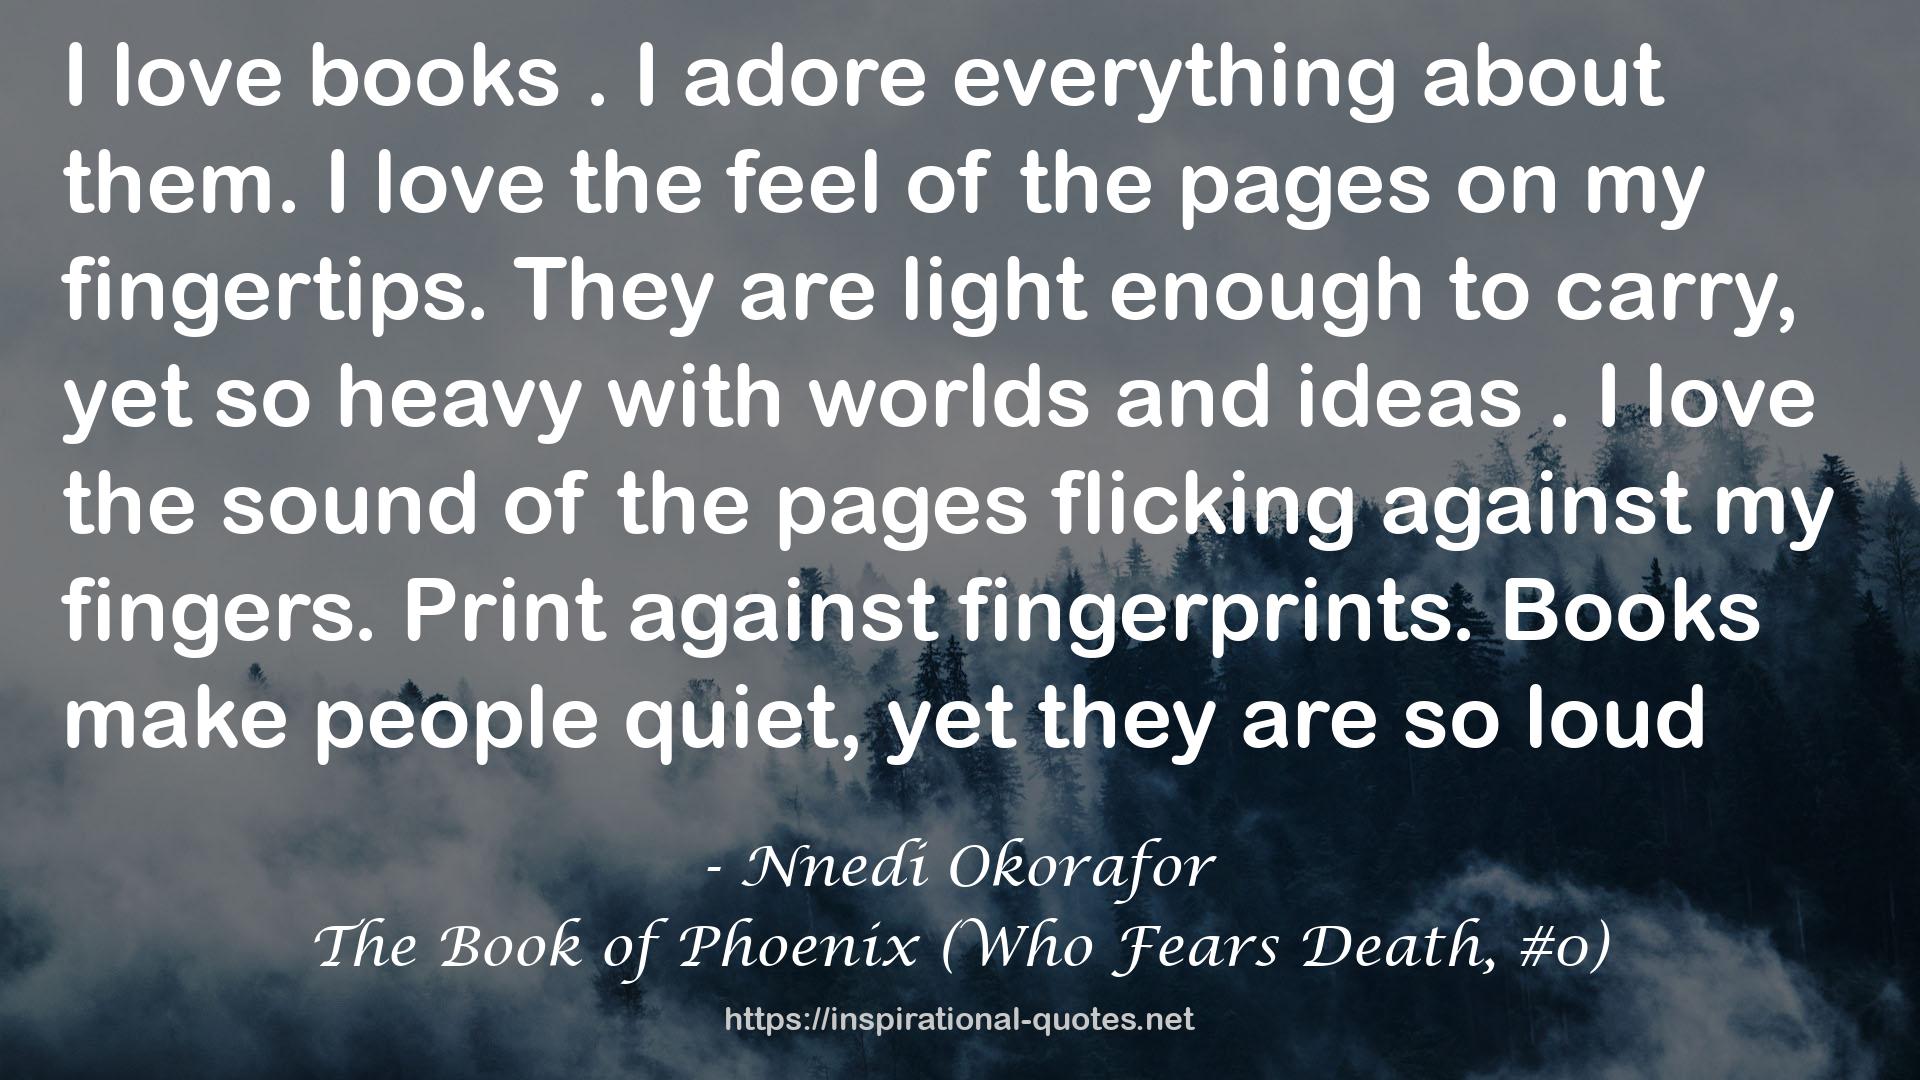 The Book of Phoenix (Who Fears Death, #0) QUOTES